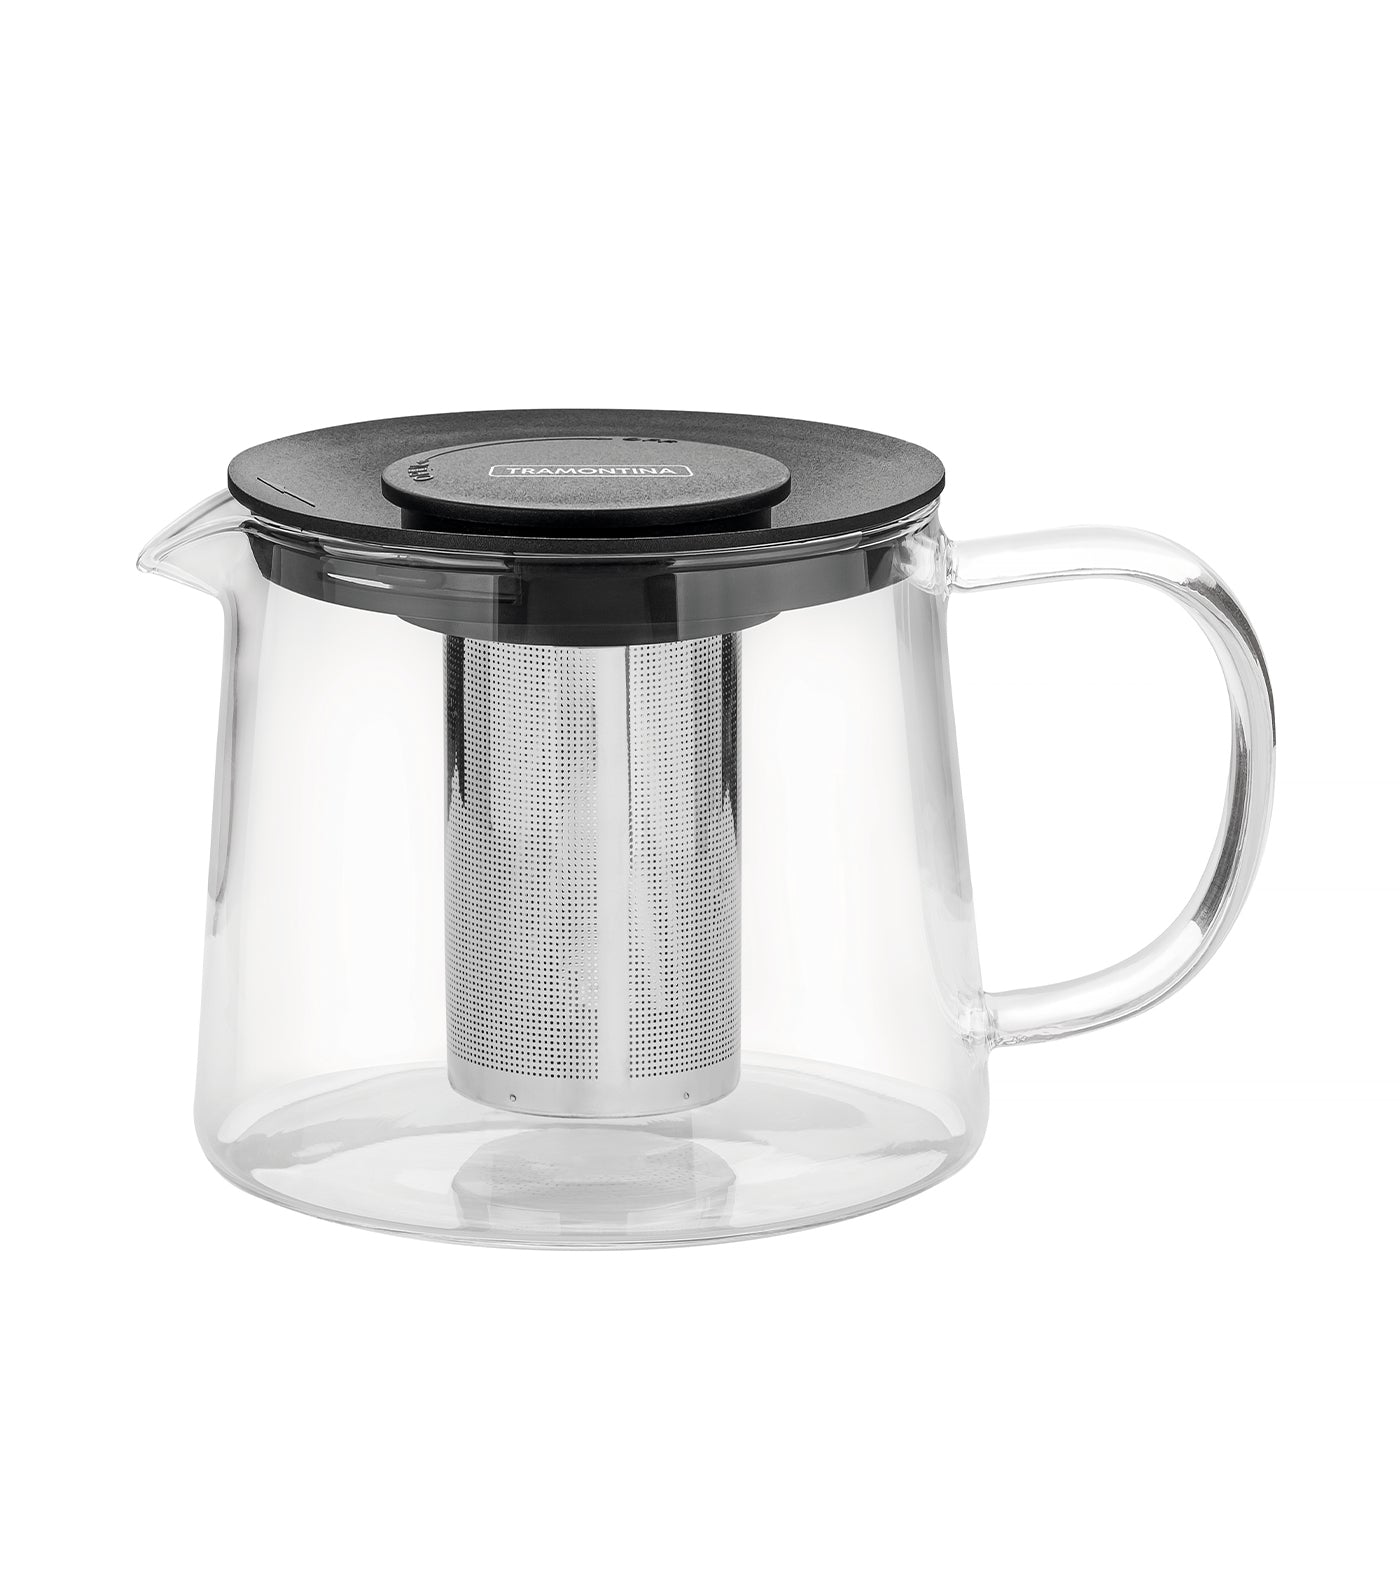 Tramontina Glass Teapot with Stainless Steel Infuser - 900ml